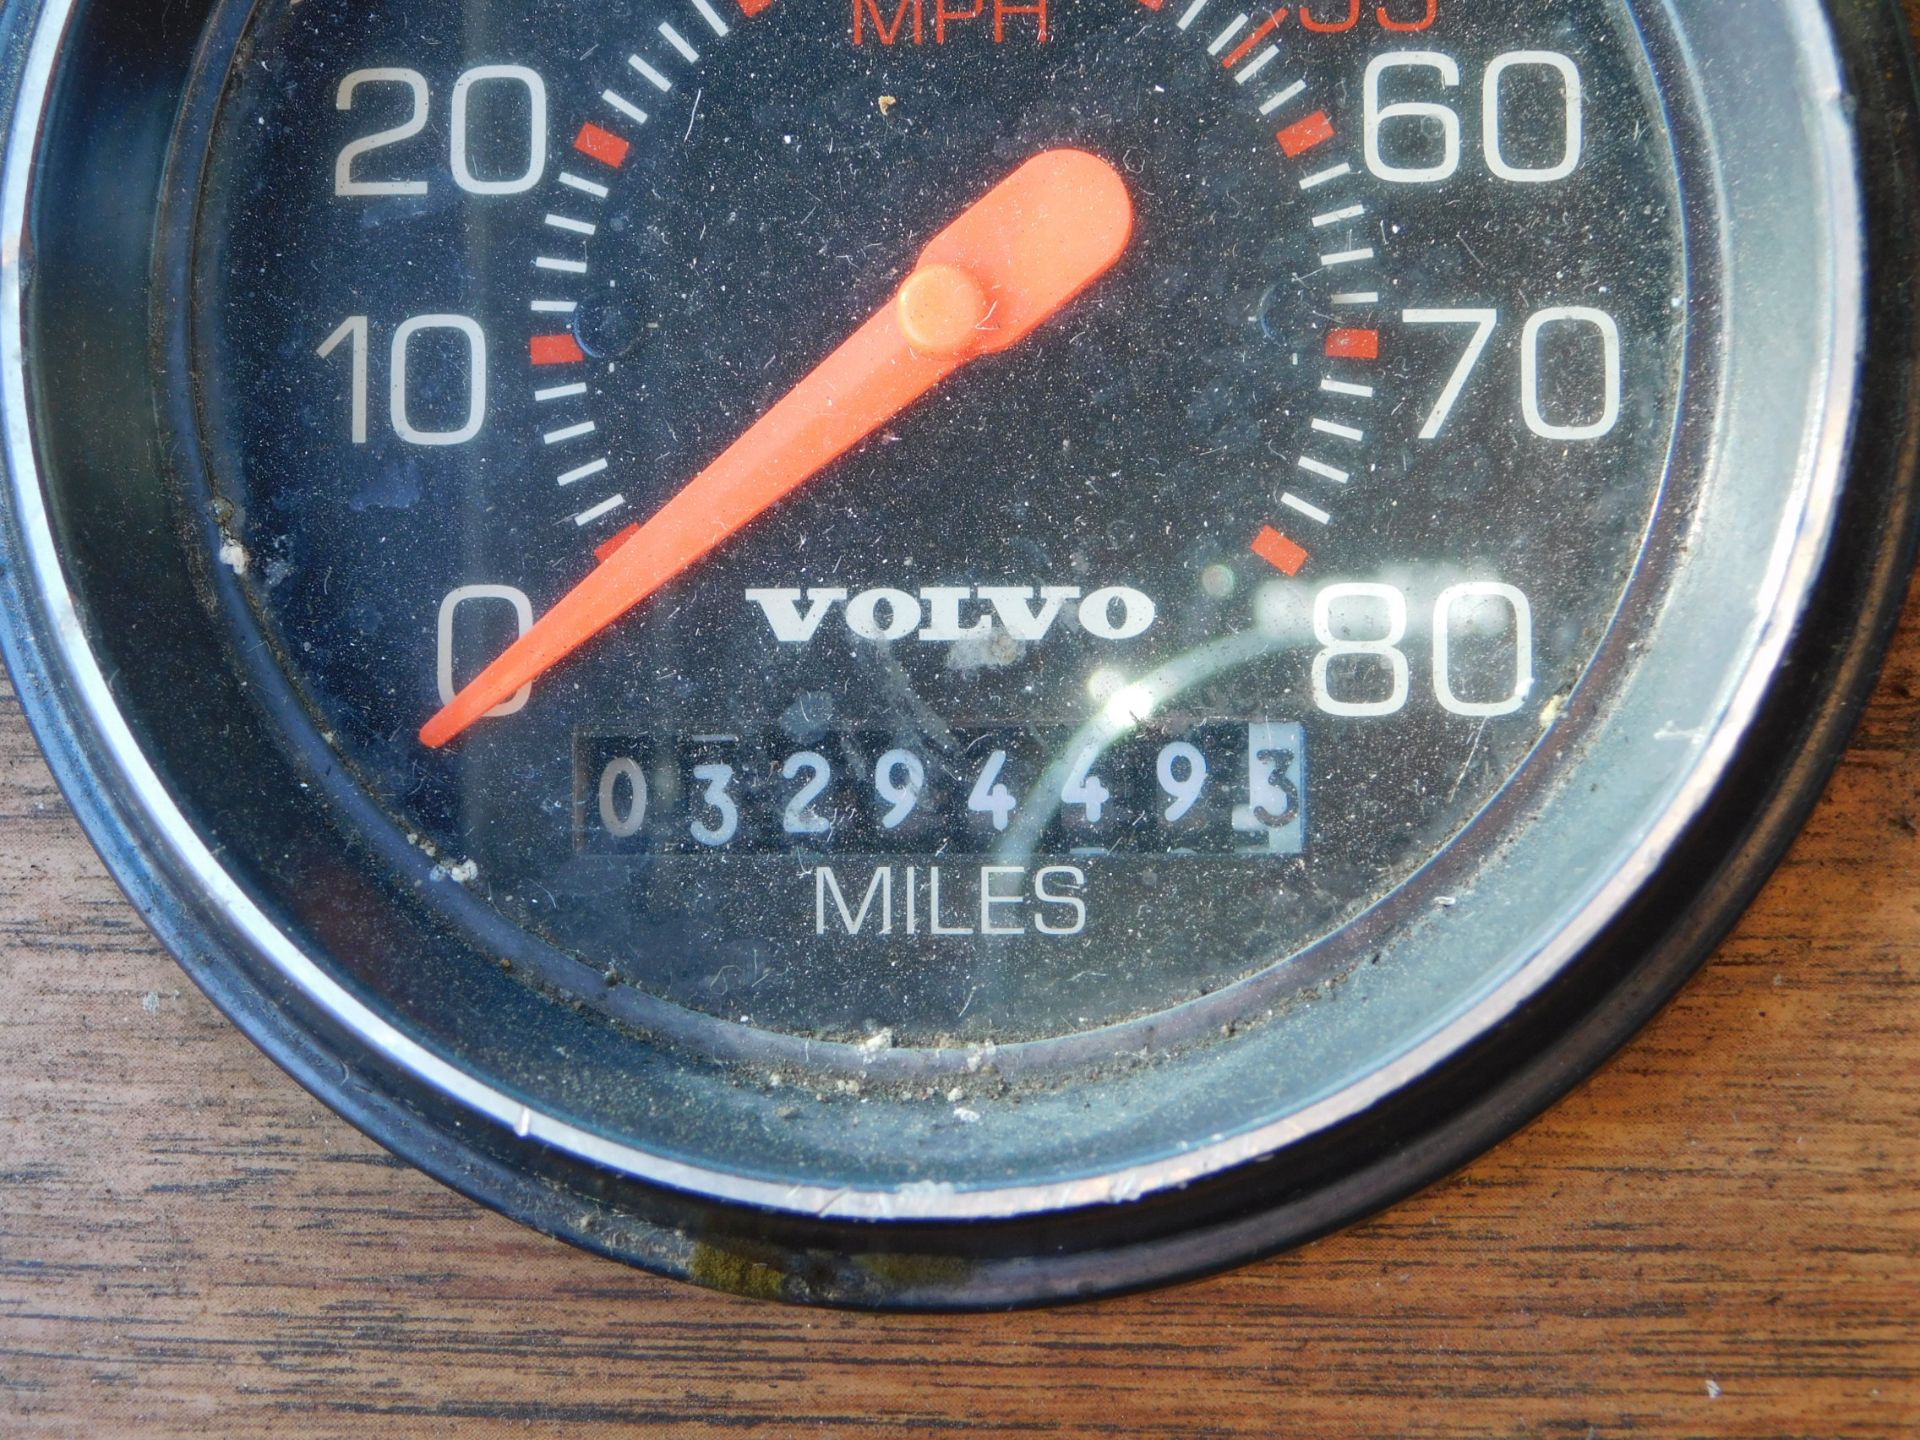 1989 WHITE Volvo GMC Aero Series 60 Heavy Duty Tow Truck, 329,000 miles showing on Odometer, Detroit - Image 27 of 28